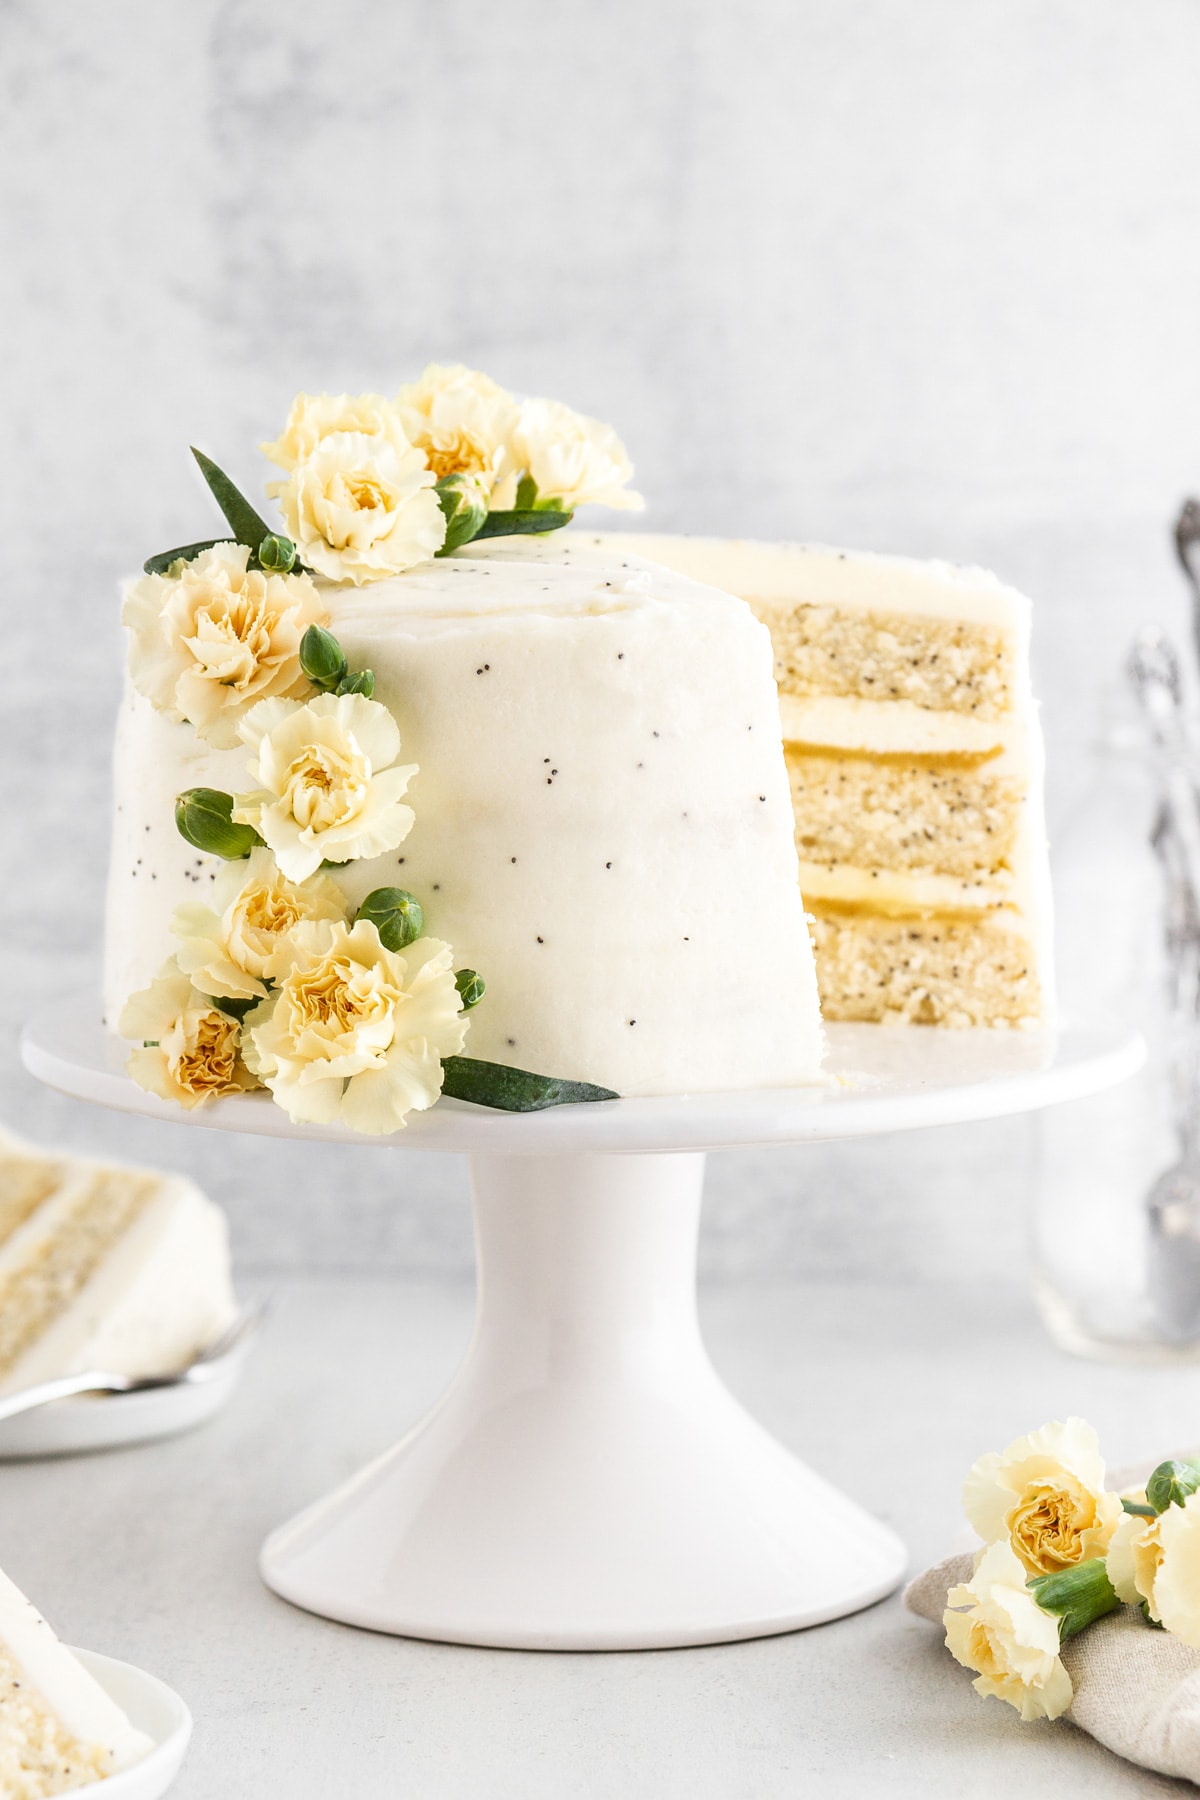 A lemon poppy seed cake on a cake stand with a slice taken out